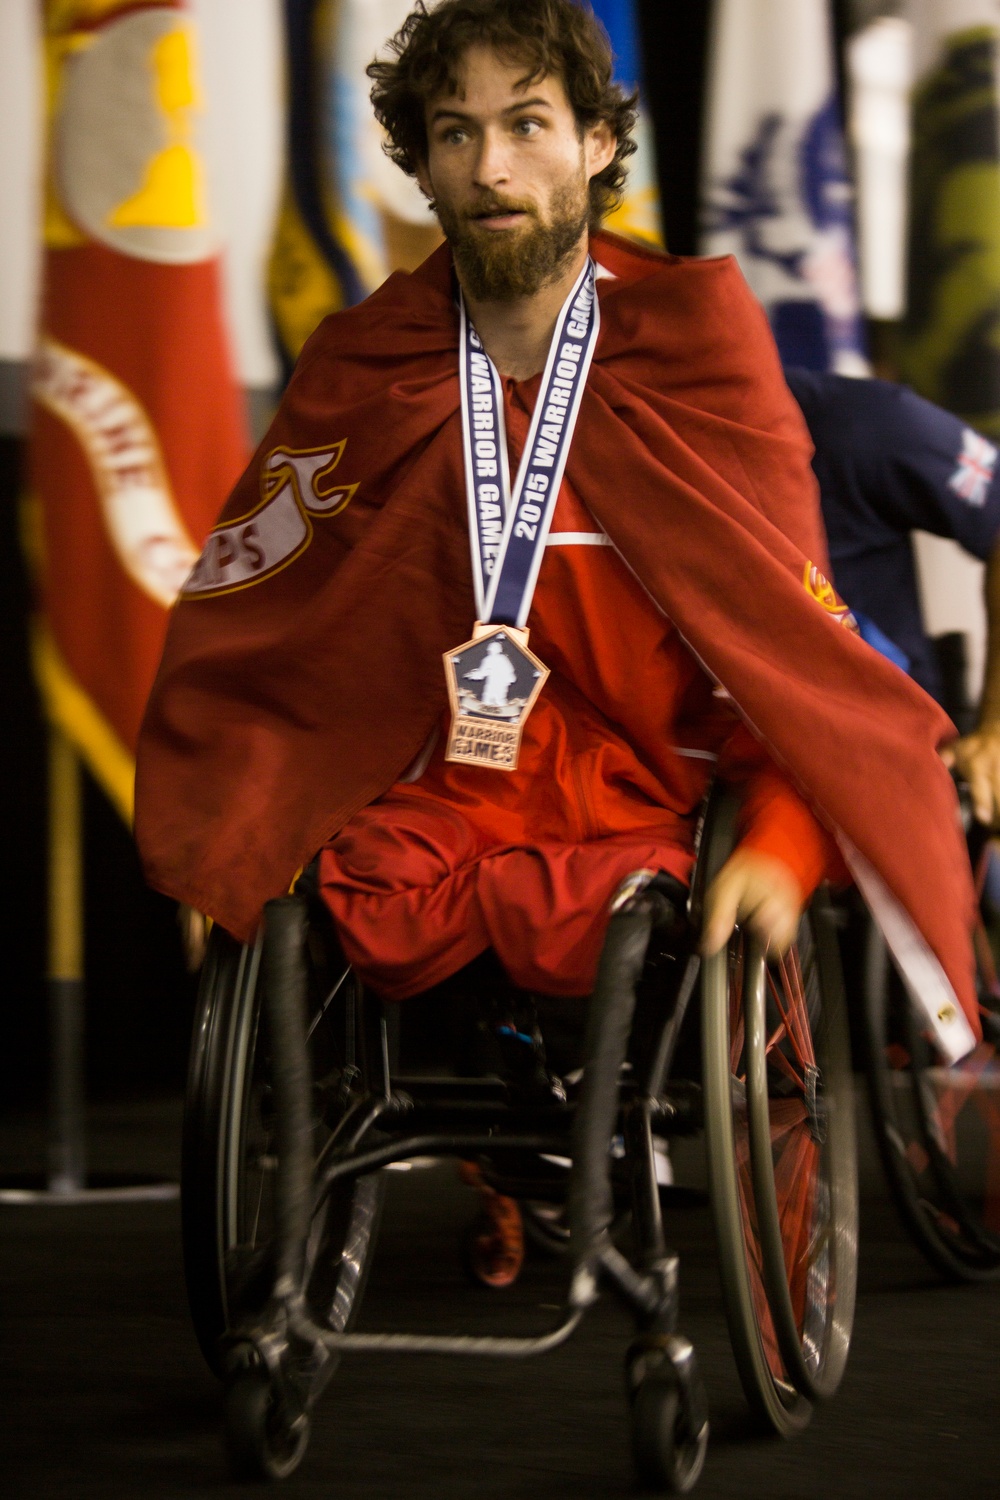 2015 DoD Warrior Games swimming medals ceremony